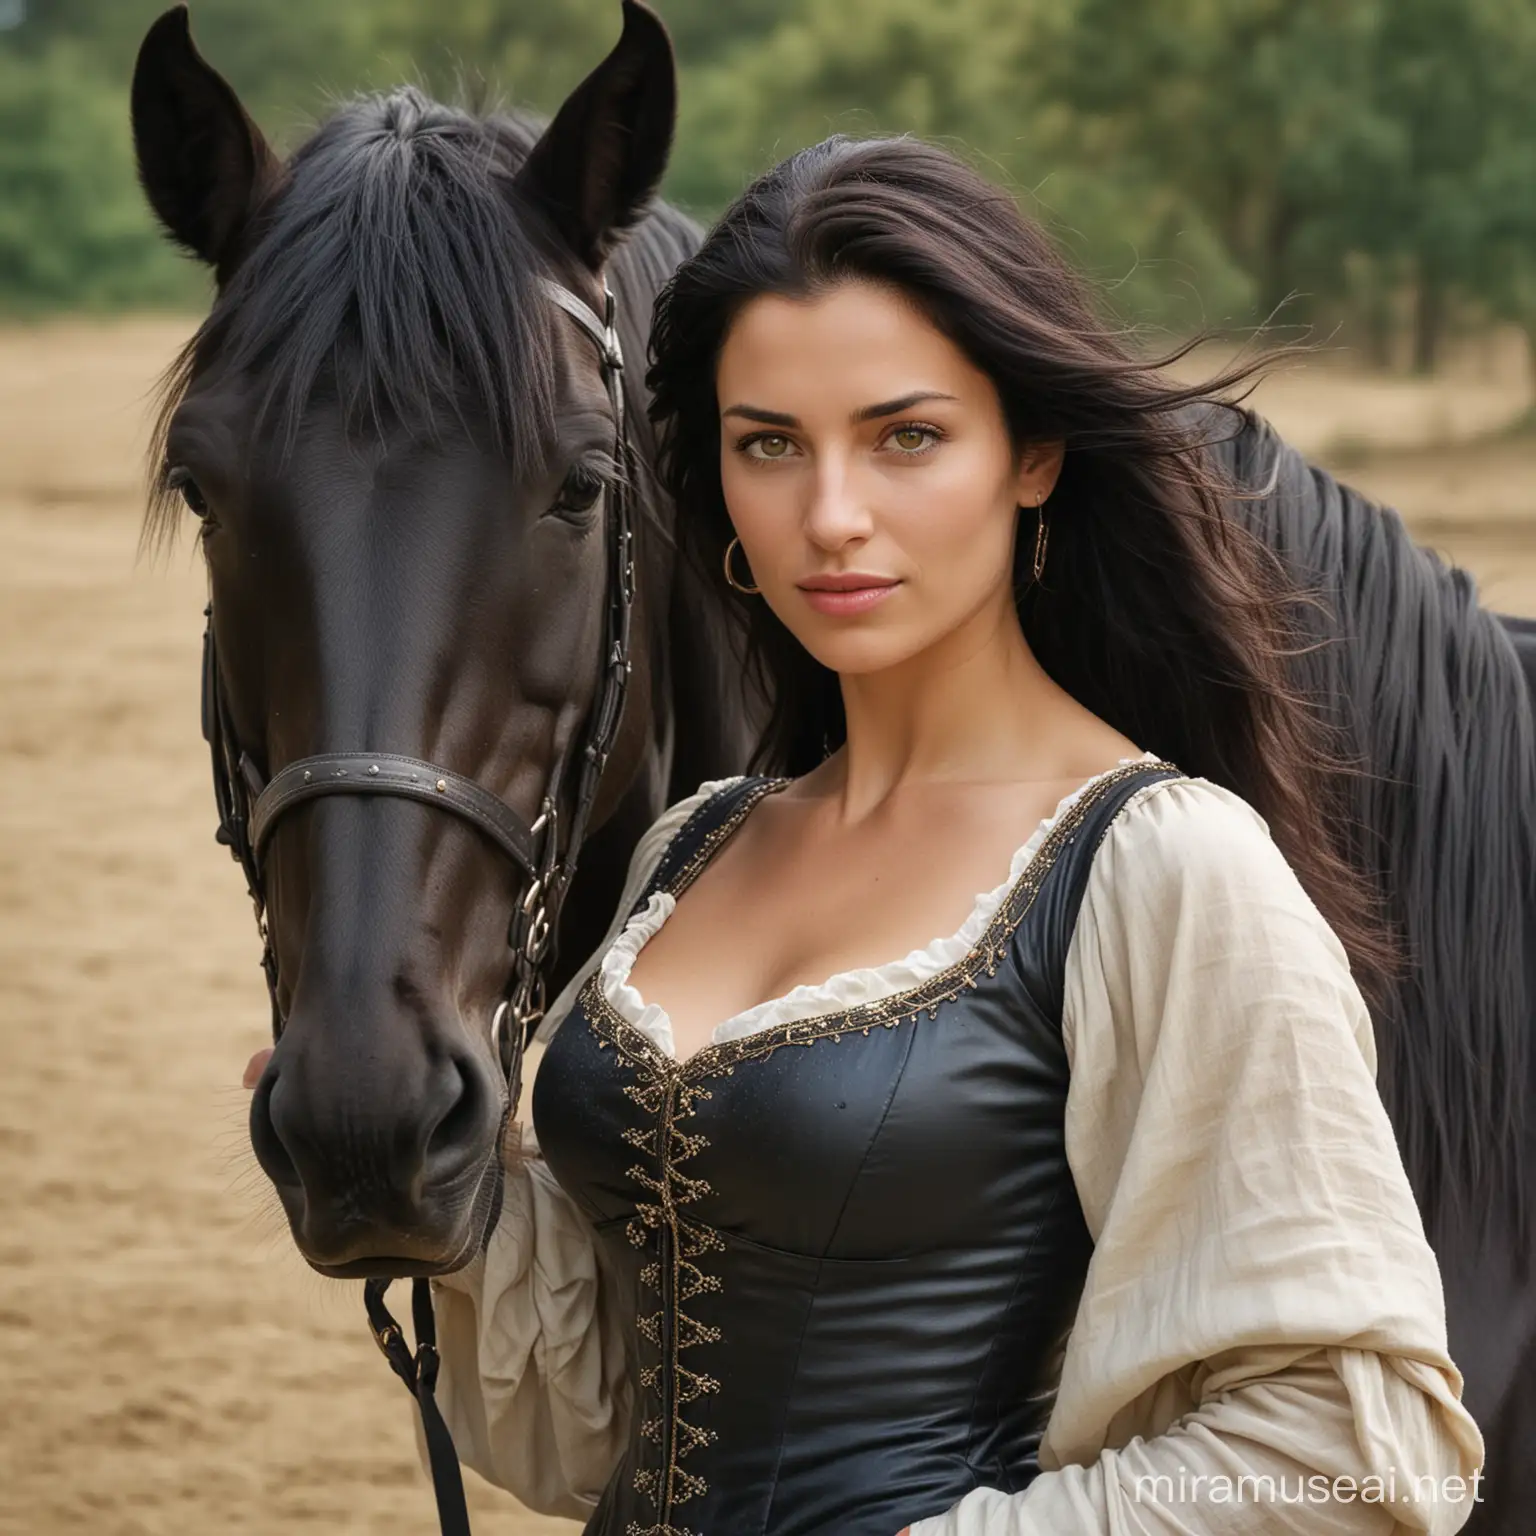 An ideal woman above 40 years old, an independent, freedom-loving young woman, tall, broad-shouldered, charismatic; all men are attracted to her. She has a black horse. A heroine of the twelfth century. belly fat. . armpits hair